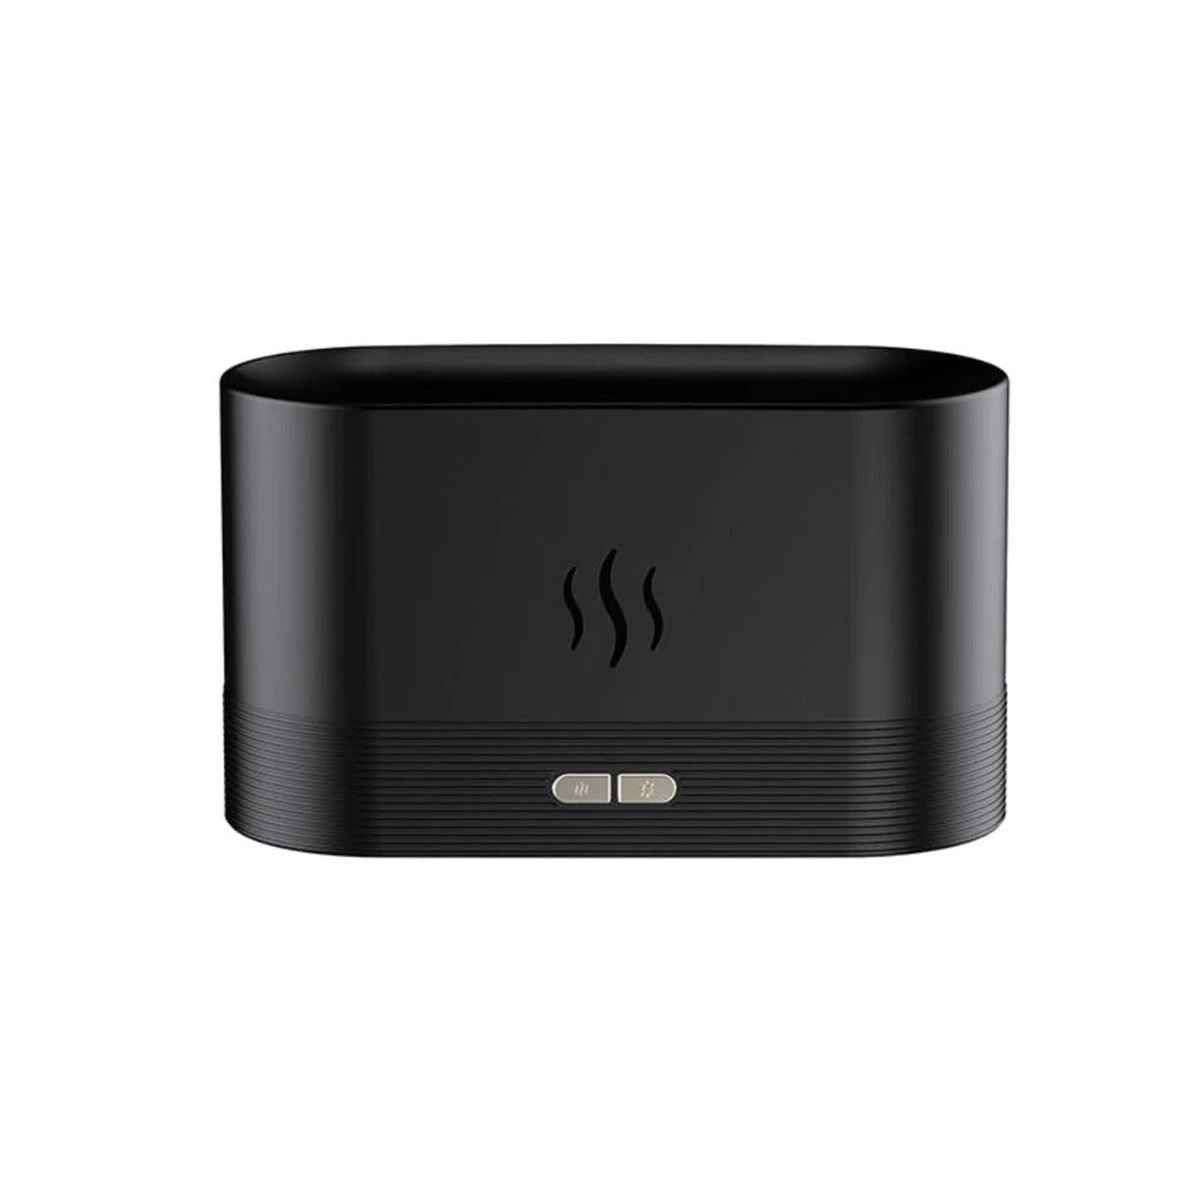 Photos - Humidifier Multitasky Aroma Air Diffuser with Simulated Flame Lighting Effect - Black